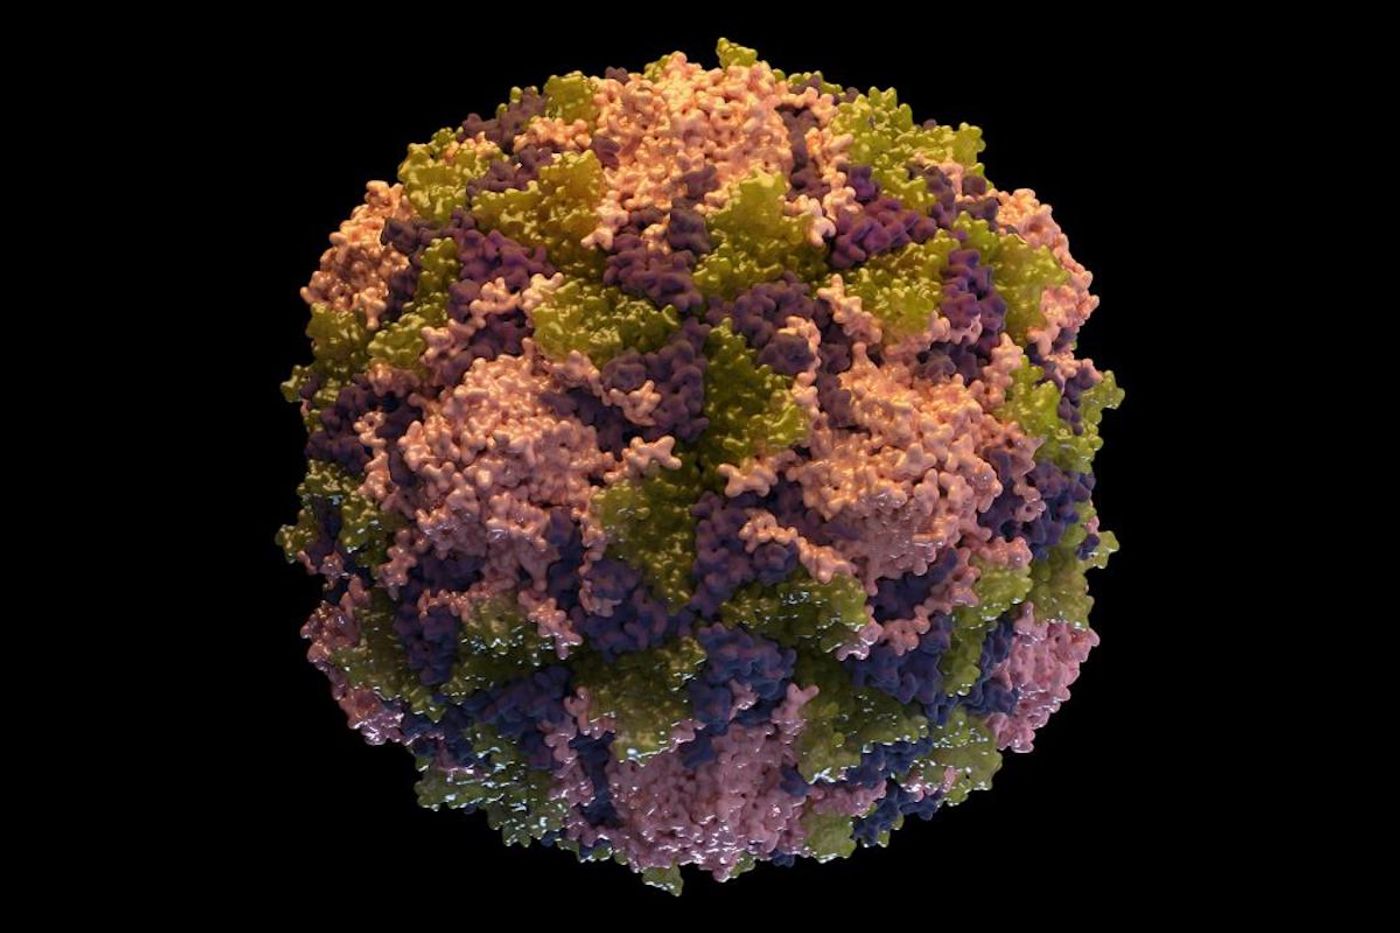 An illustration of a poliovirus particle, each consisting of 60-copies of capsid polypeptides, designated as VP1 (viral protein1) (Pink), VP2 (Green), VP3(Purple) and VP4 (not shown). / Credit: CDC/ Sarah Poser / Photo Credit: Meredith Boyter Newlove, M.S.